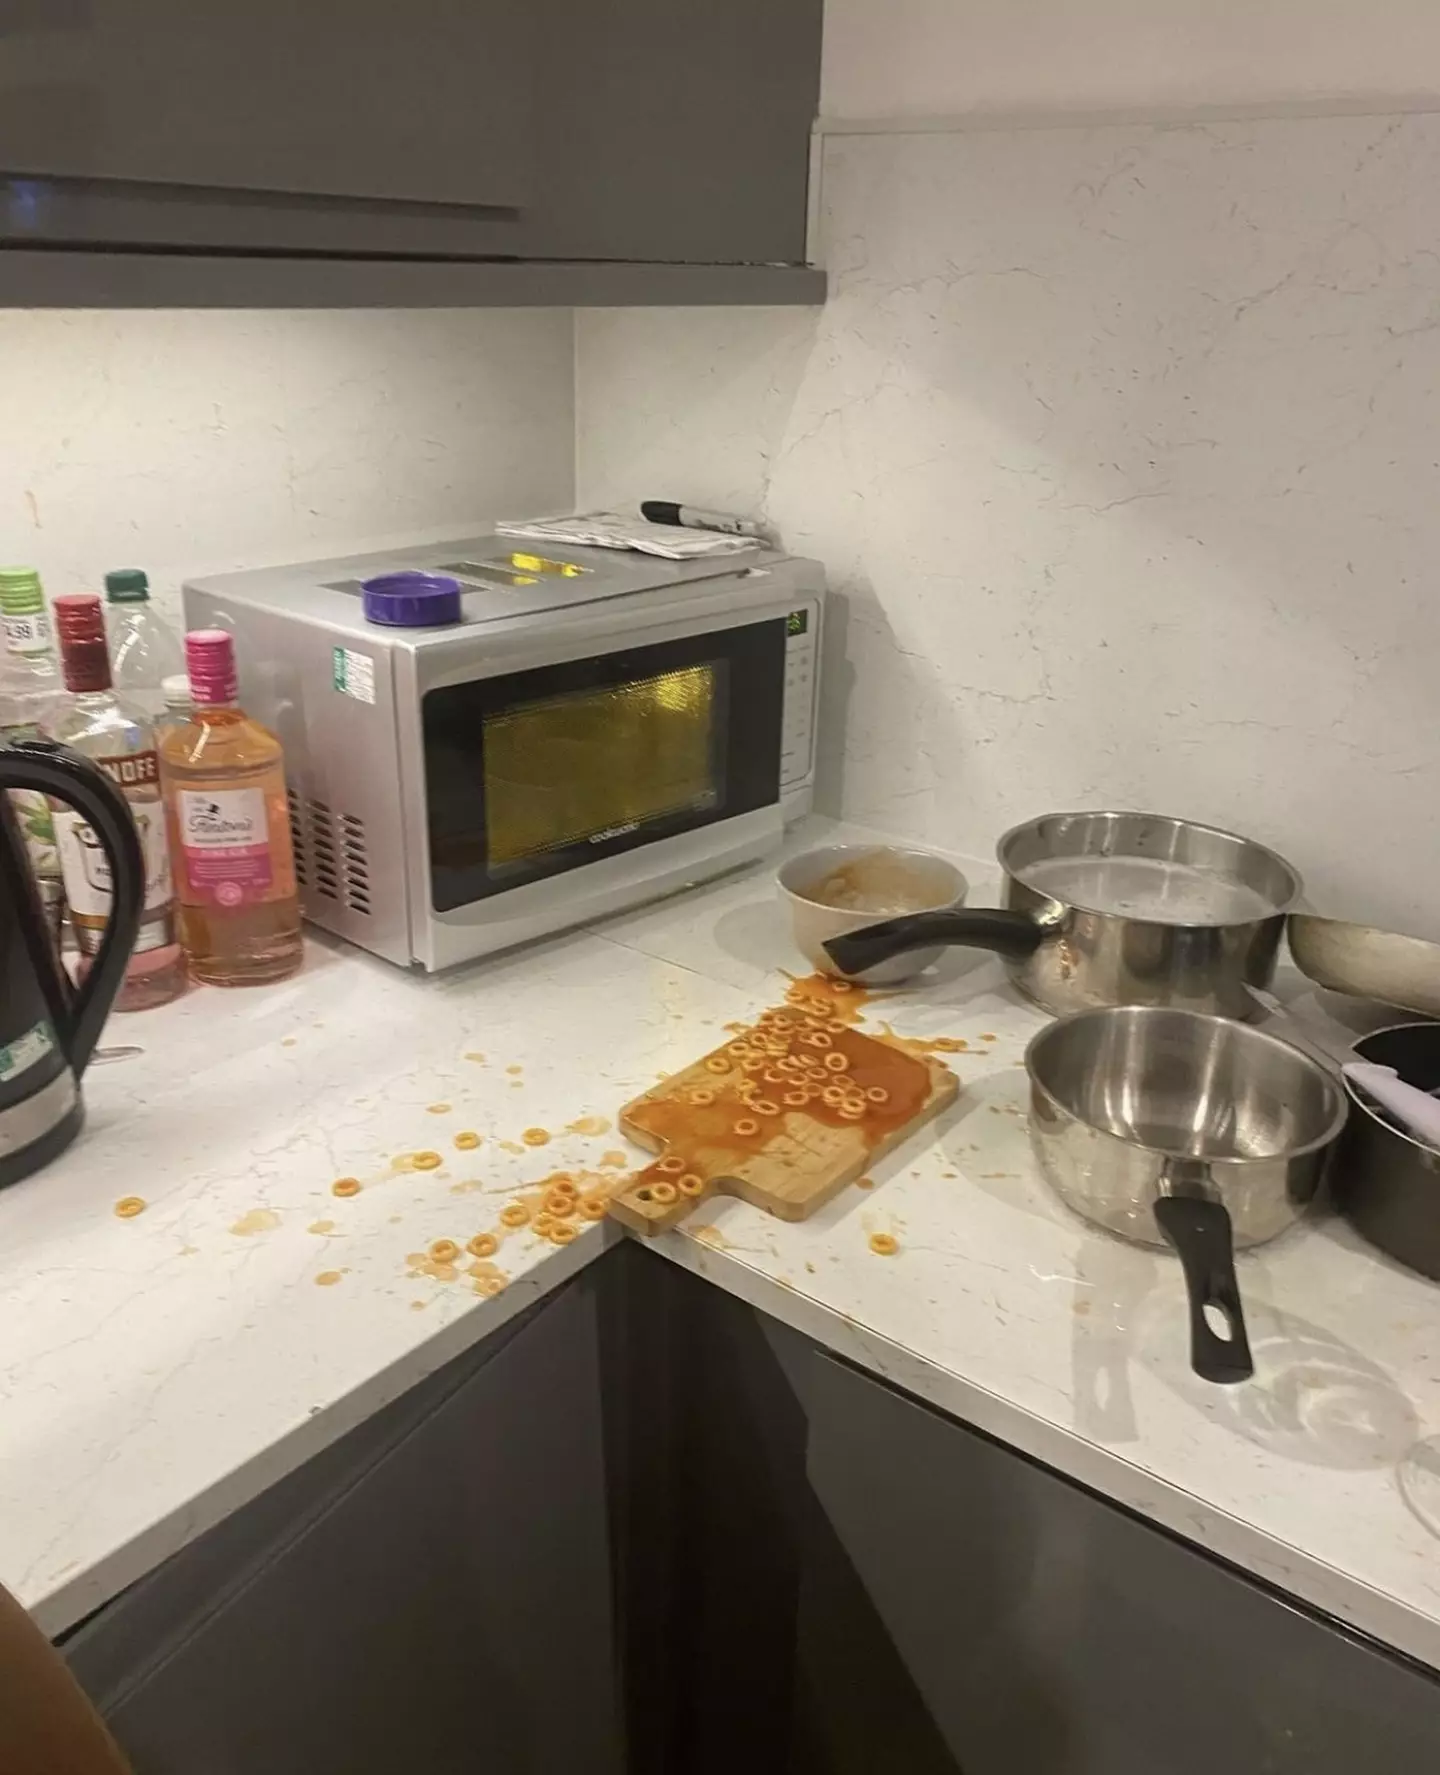 The spaghetti hoops exploded as she got them out of the microwave. (Kennedy News and Media)